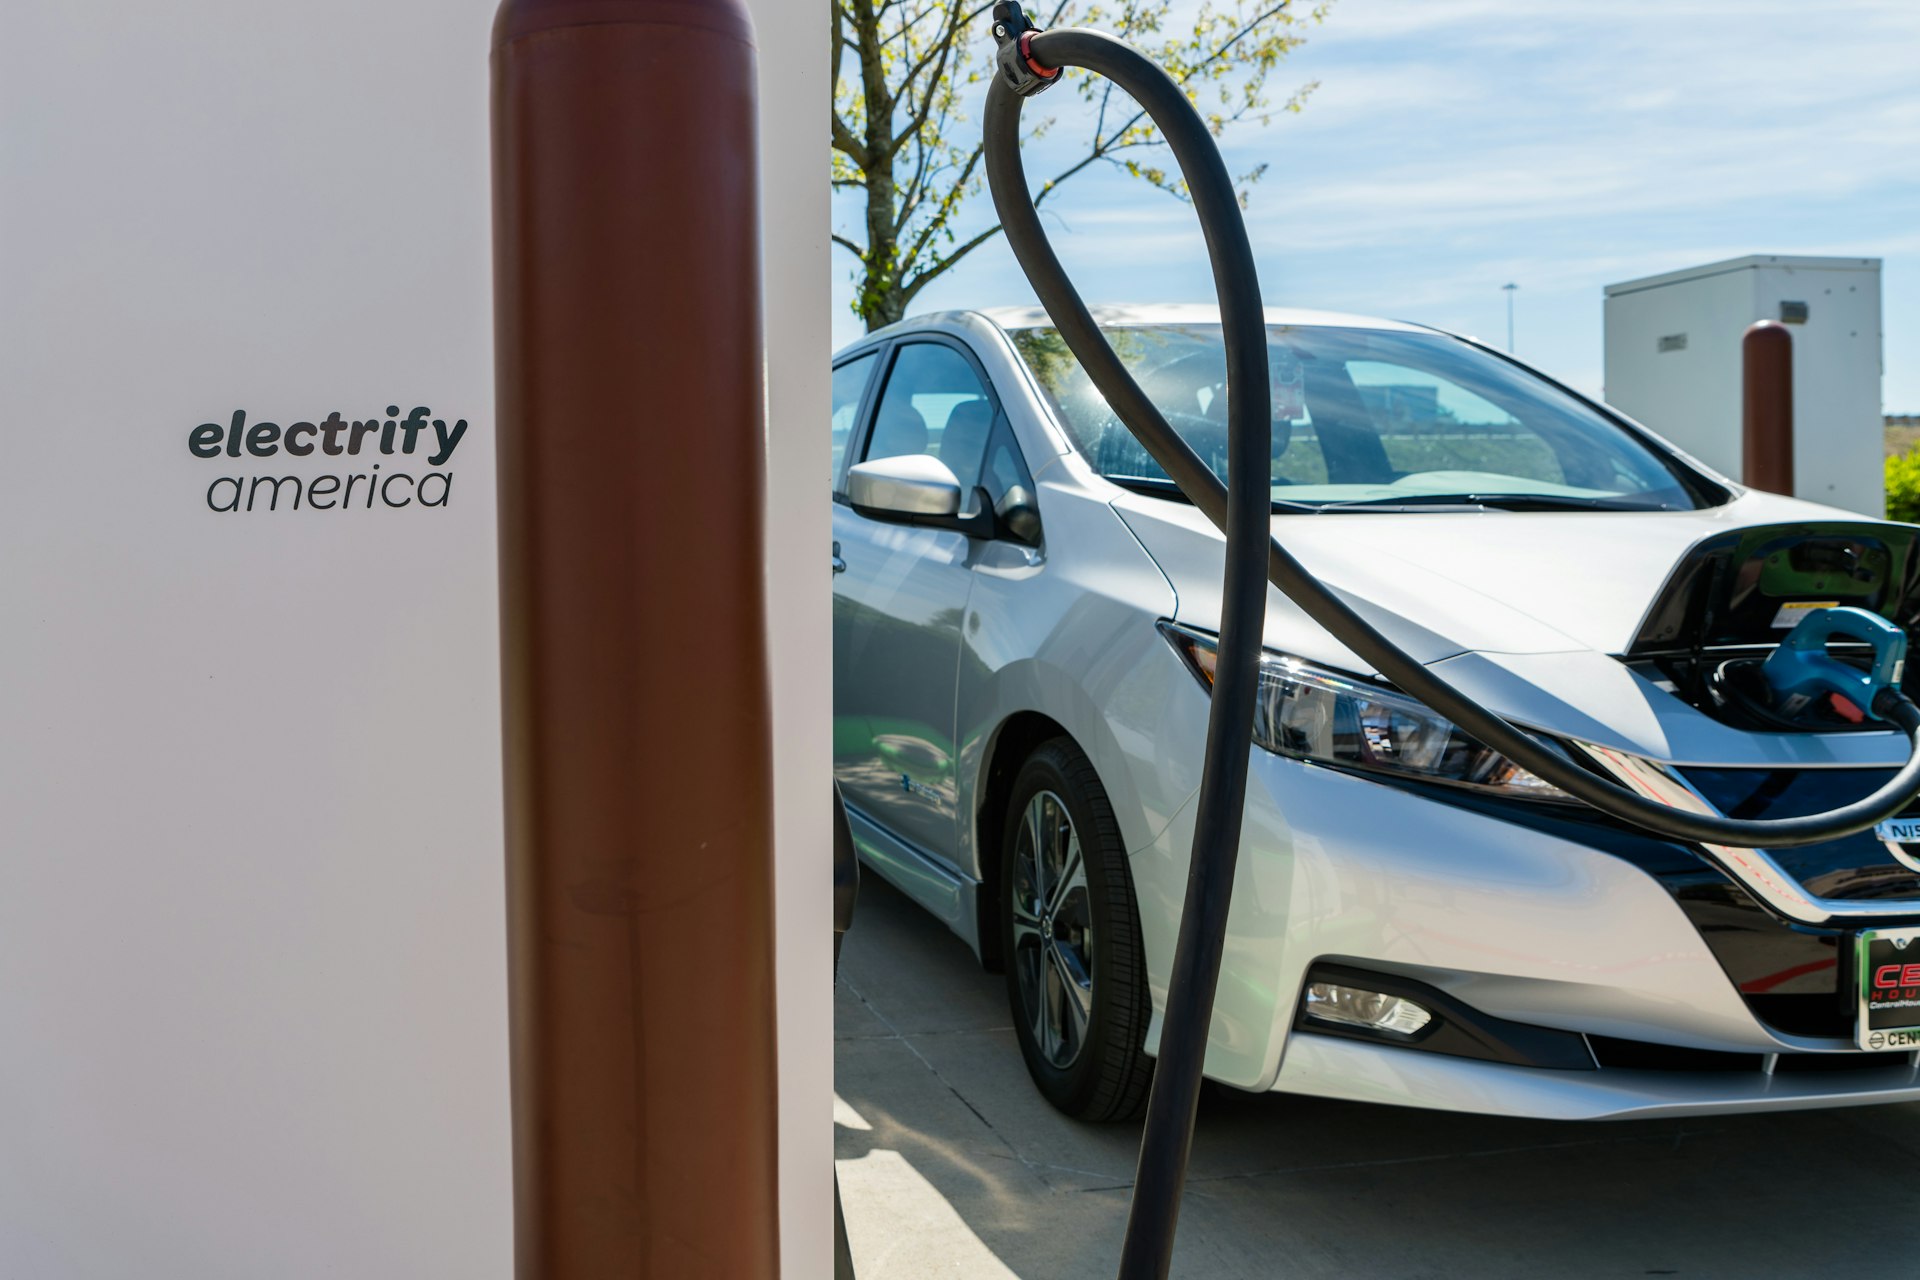 A Nissan Leaf EV charges at an Electrify American charging station